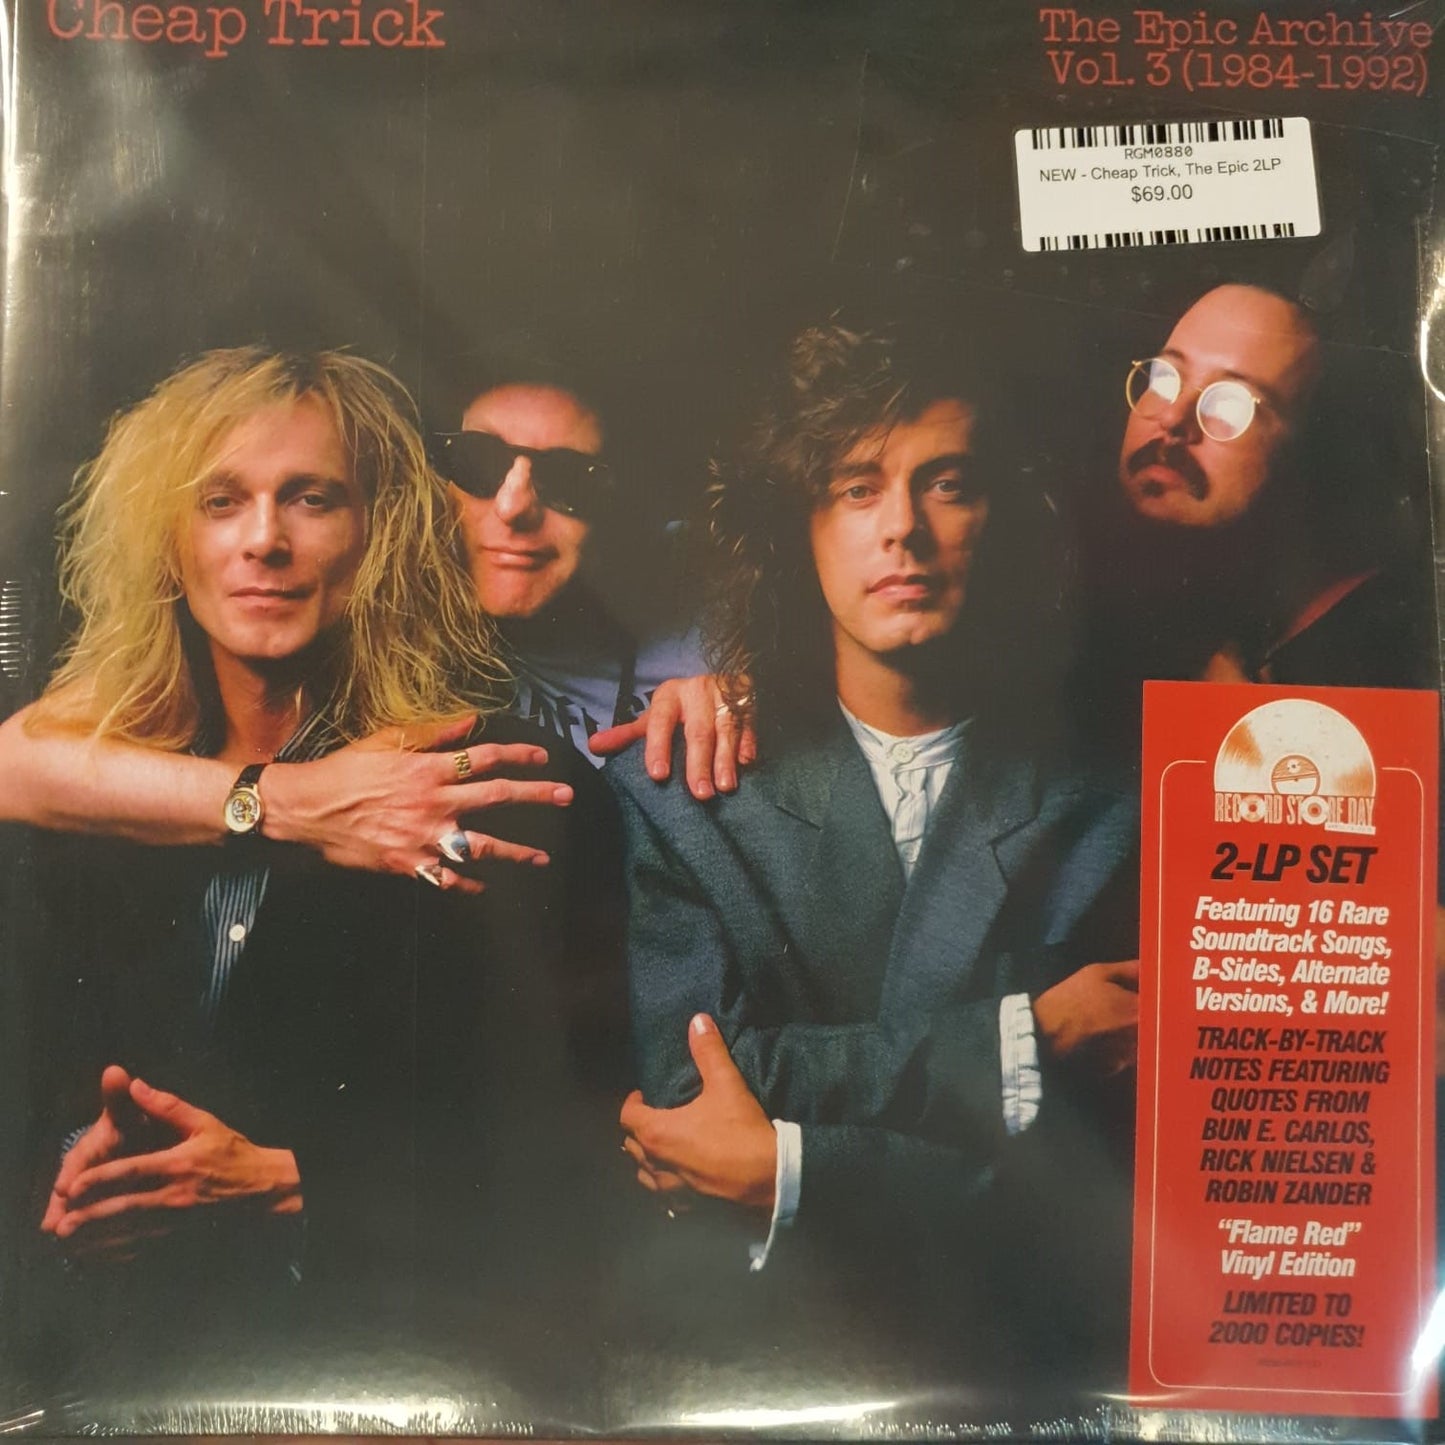 NEW - Cheap Trick, The Epic Archive, Vol 3 - 1984-1992  Red Vinyl